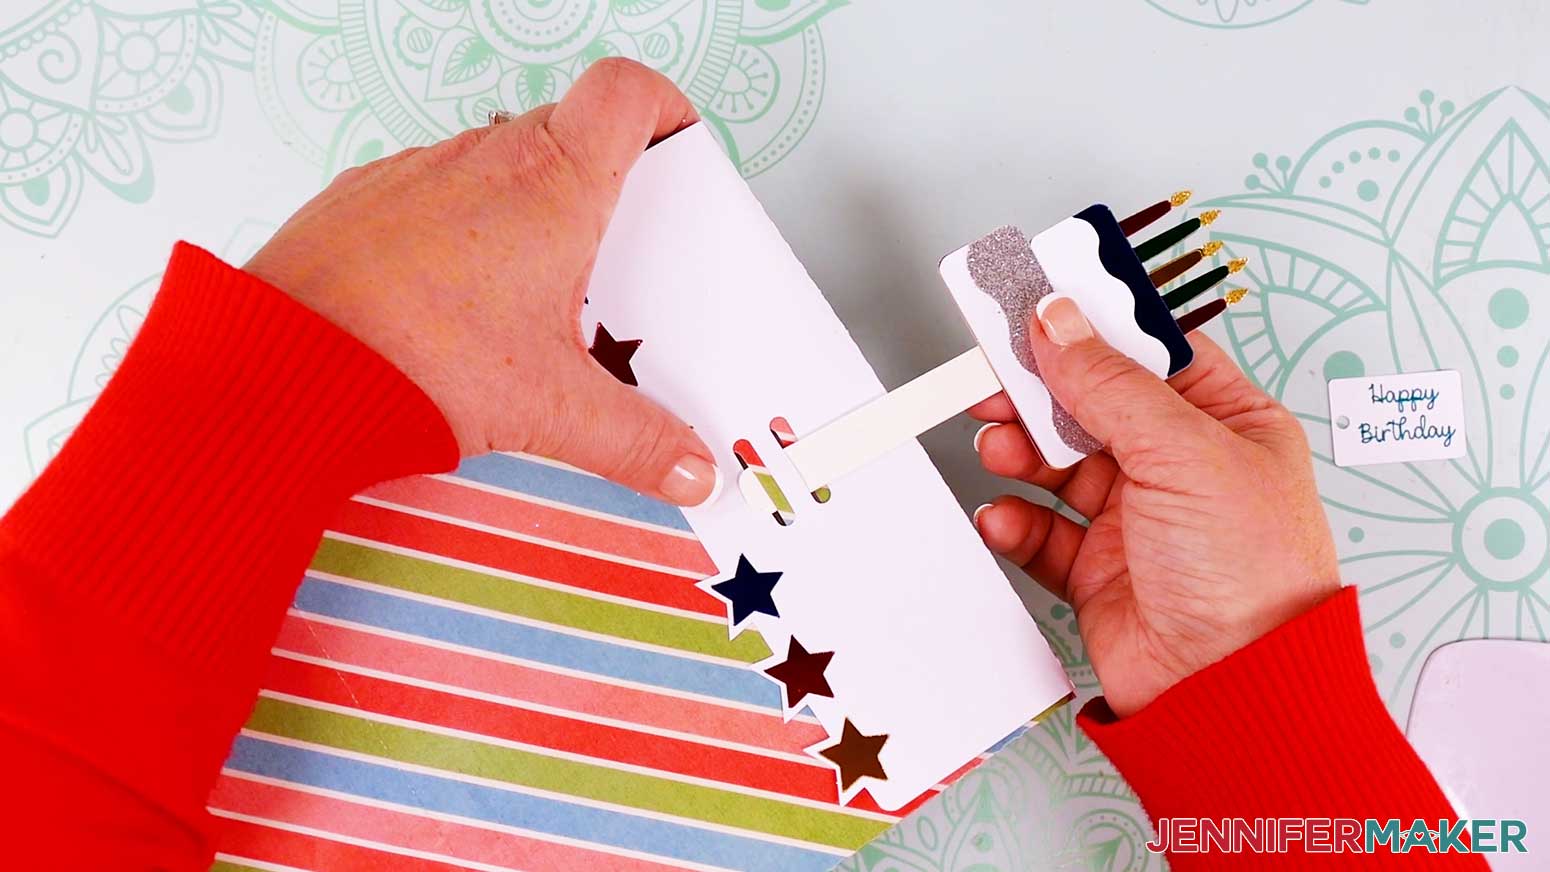 Insert the pick through the slots in the top-fold of the gift bag.